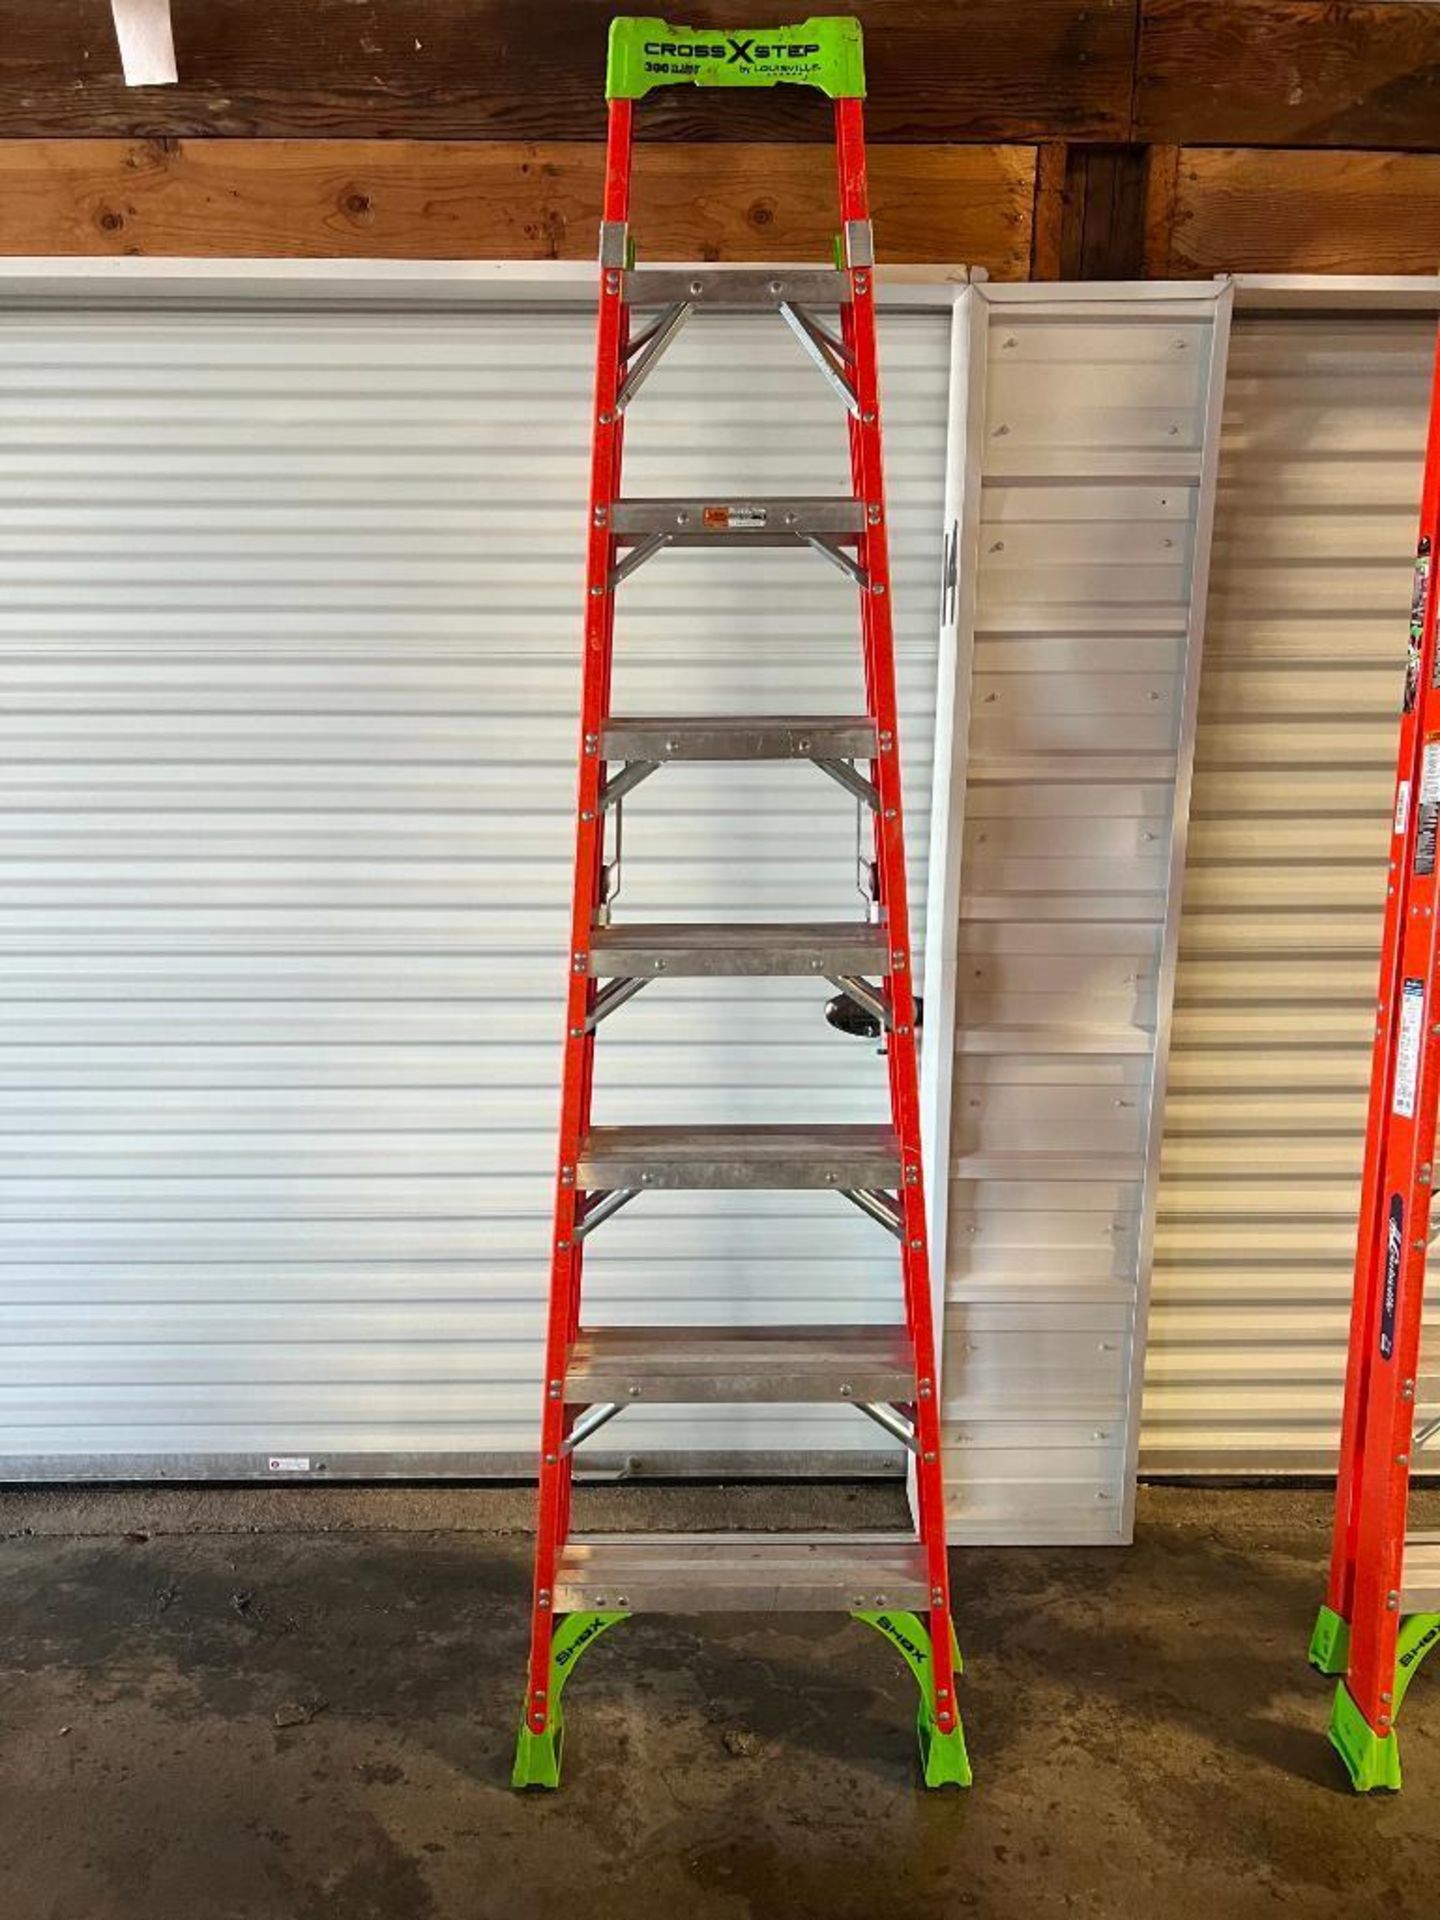 12' Louisville CrossXstep Step Ladder, Model FXS1508, 300# Load Capacity. Located in Mt. Pleasant, I - Image 2 of 5